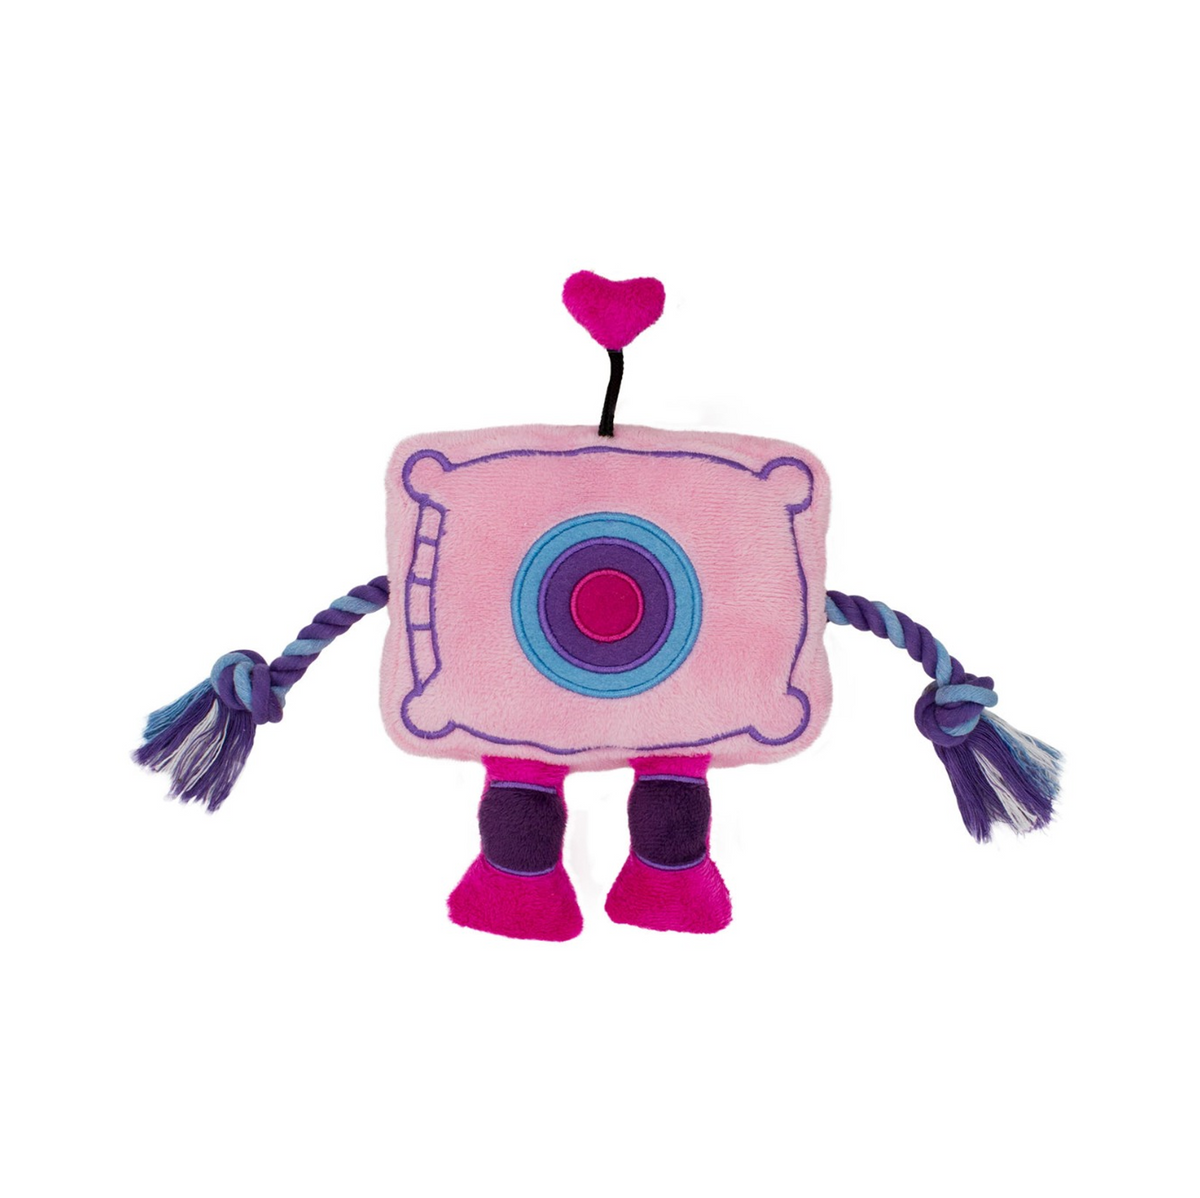 Lovelly Creations Planet Series - Pingo (Buddy)